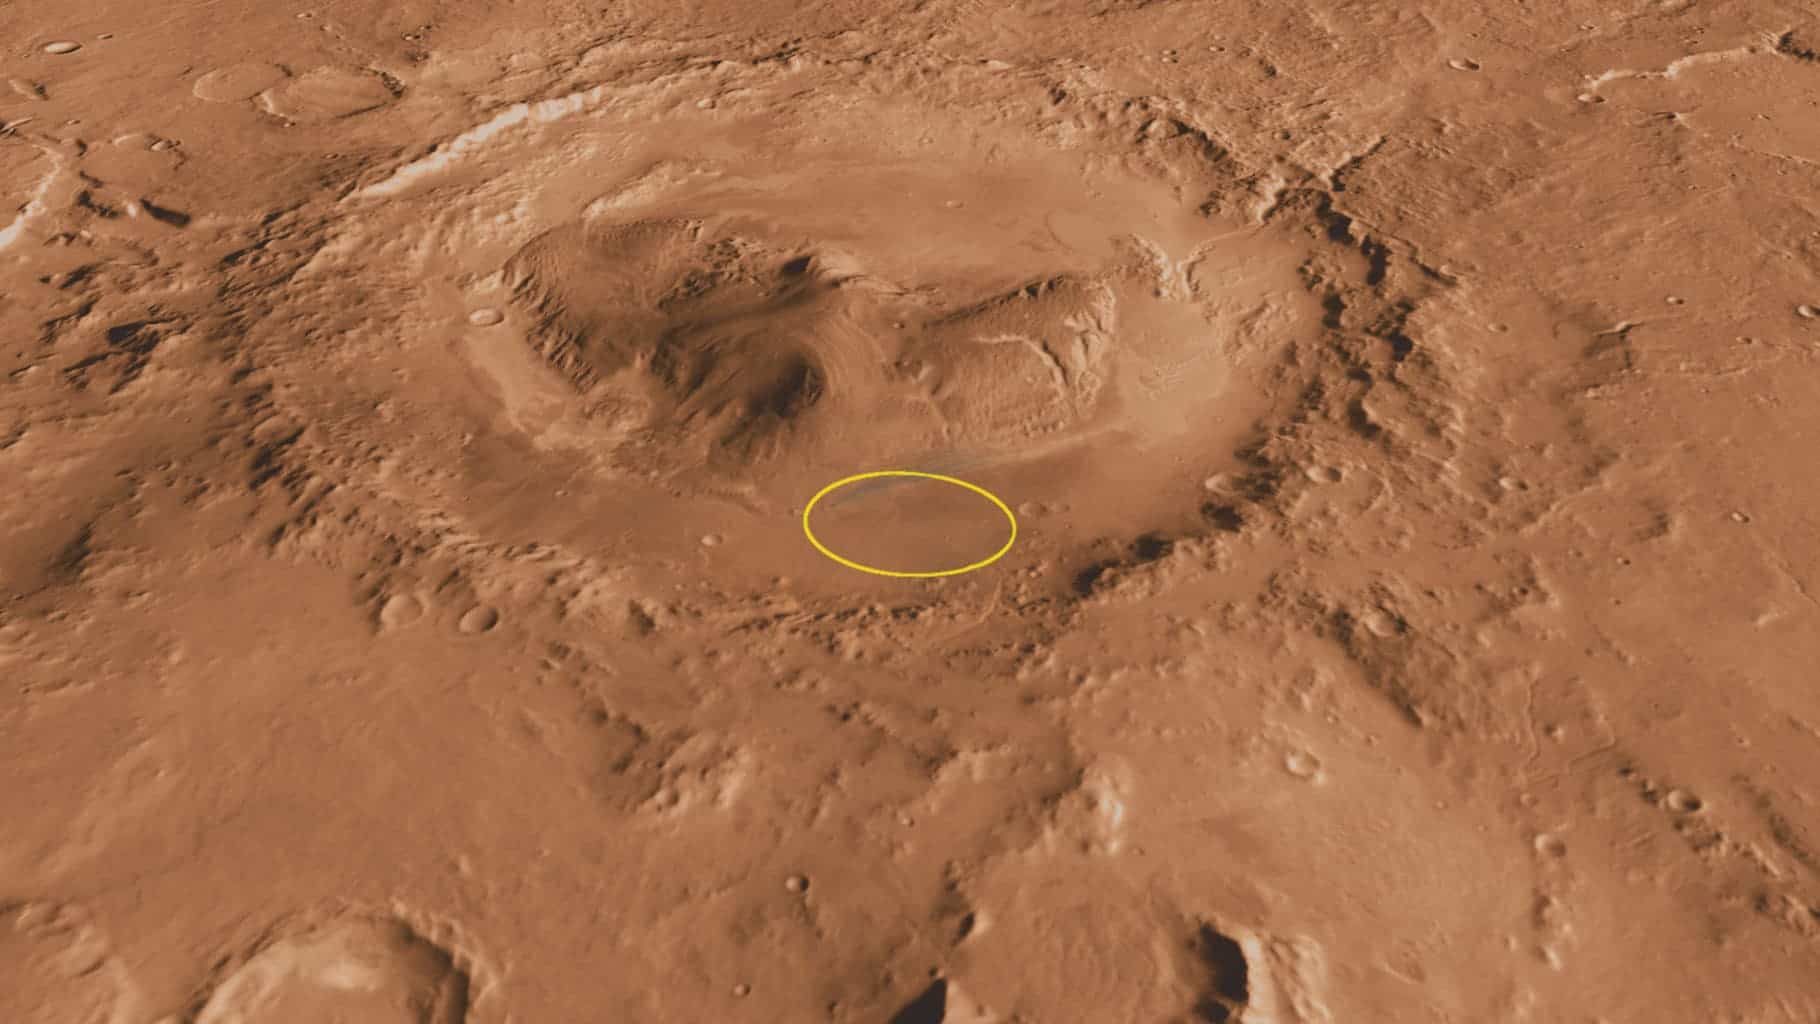 Curiosity's landing site in Gale Crater. Image credits: NASA/JPL.